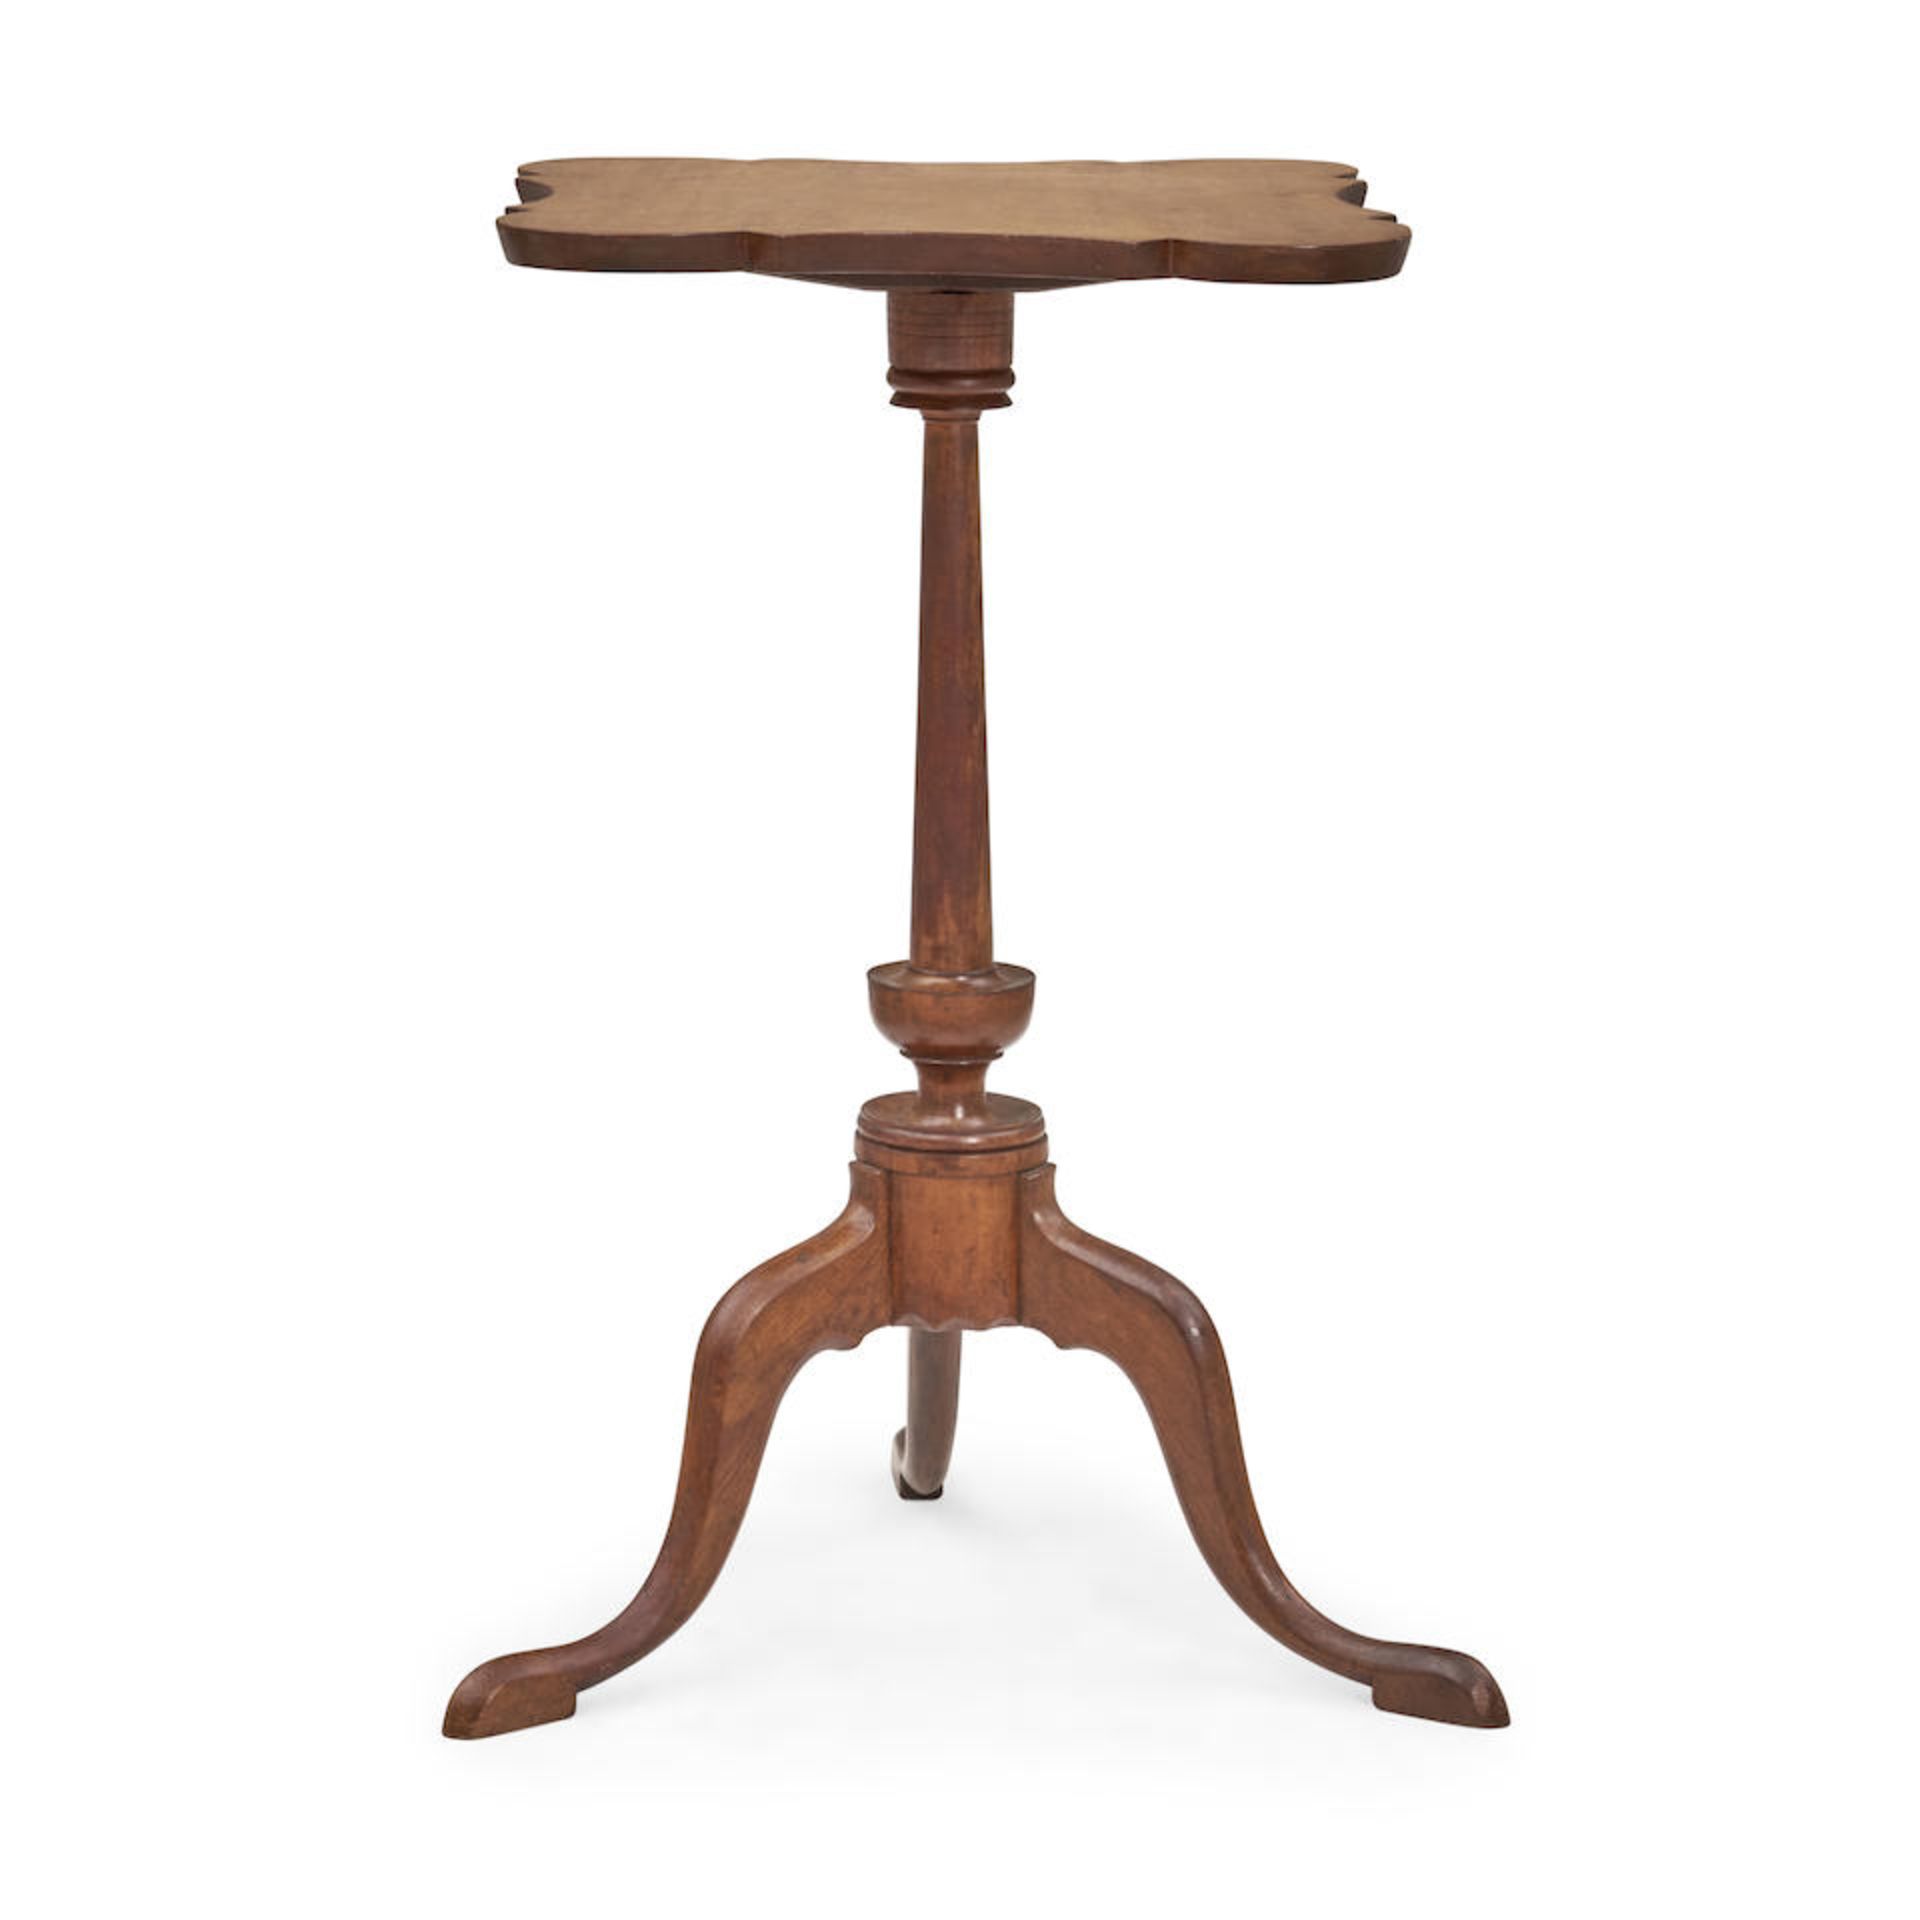 Queen Anne Cherry Candlestand, Chapin School, Connecticut River Valley, c. 1770-90.